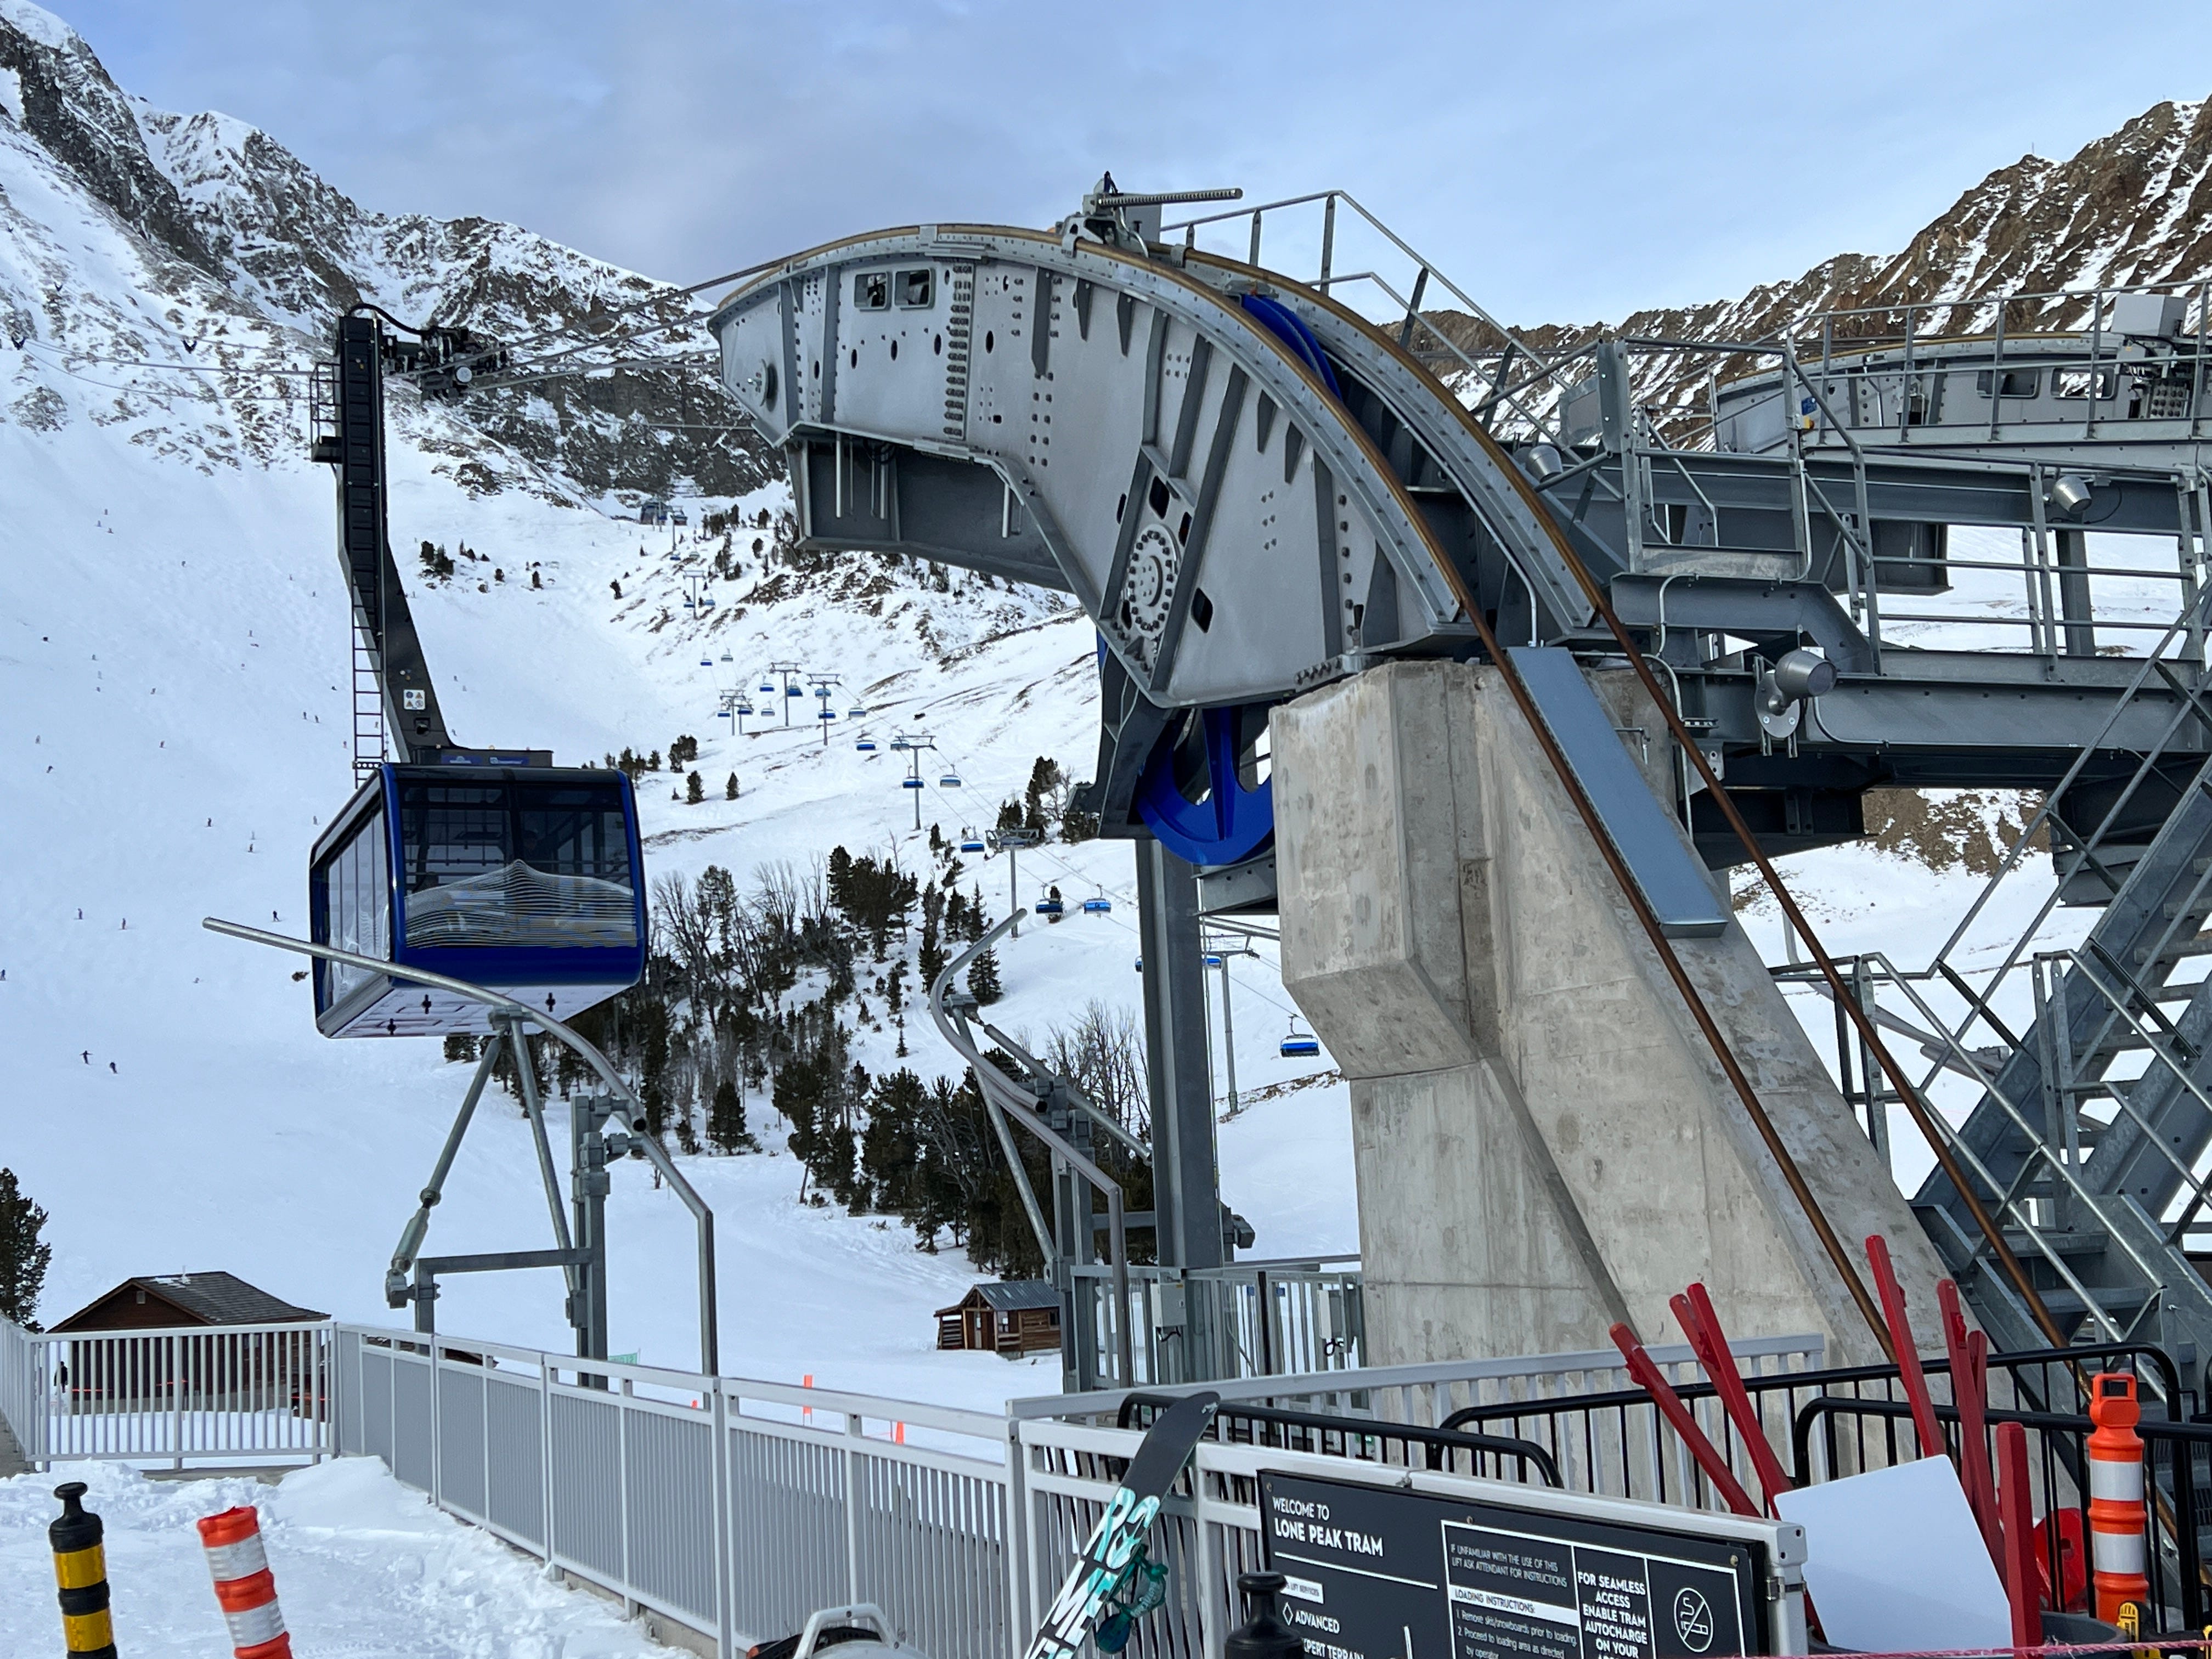 The Storm Live #2: On The Ground for the Opening of Big Sky’s New Lone Peak Tram